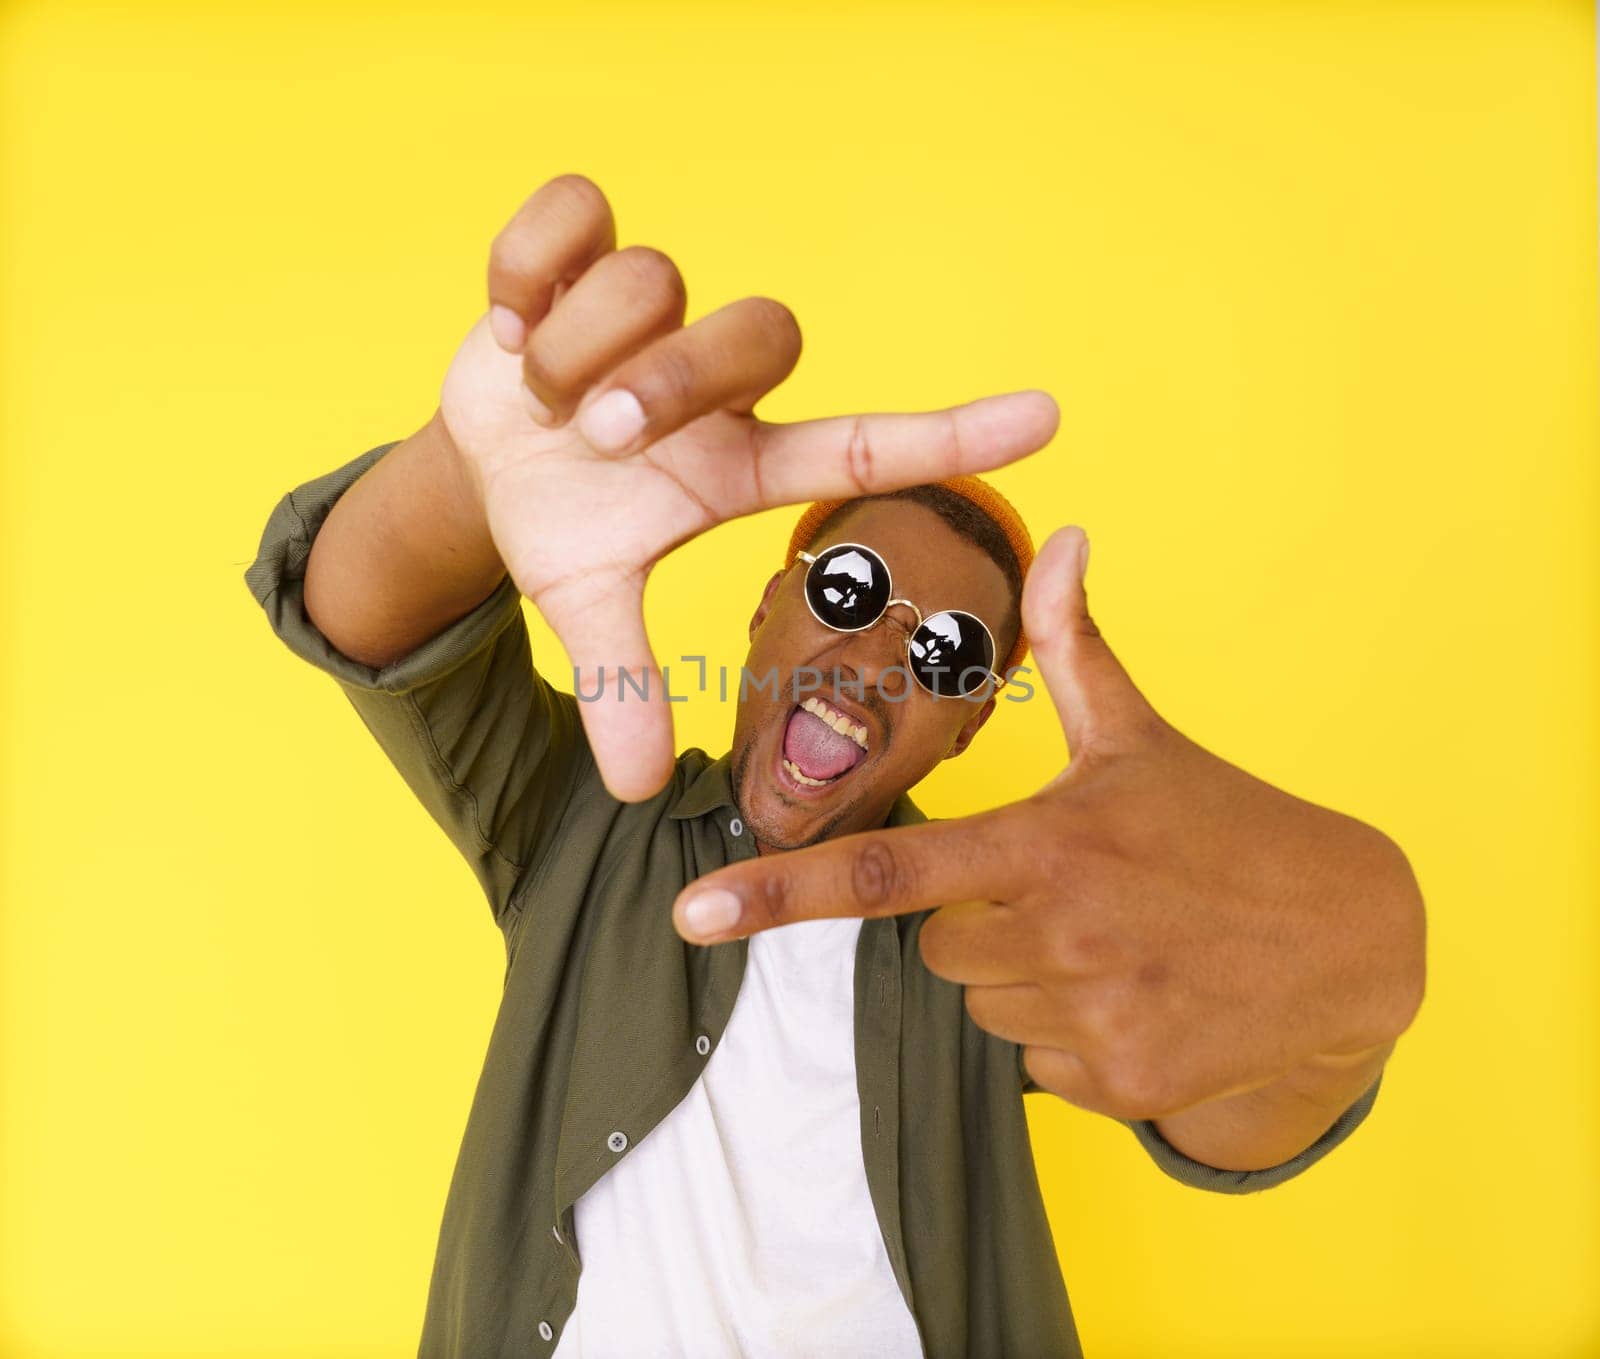 Creative young man on yellow background is seen making composition frame from his fingers, showcasing his artistic and imaginative abilities. Concept of innovation and inspiration, using hand gestures as non-verbal communication tool. by LipikStockMedia